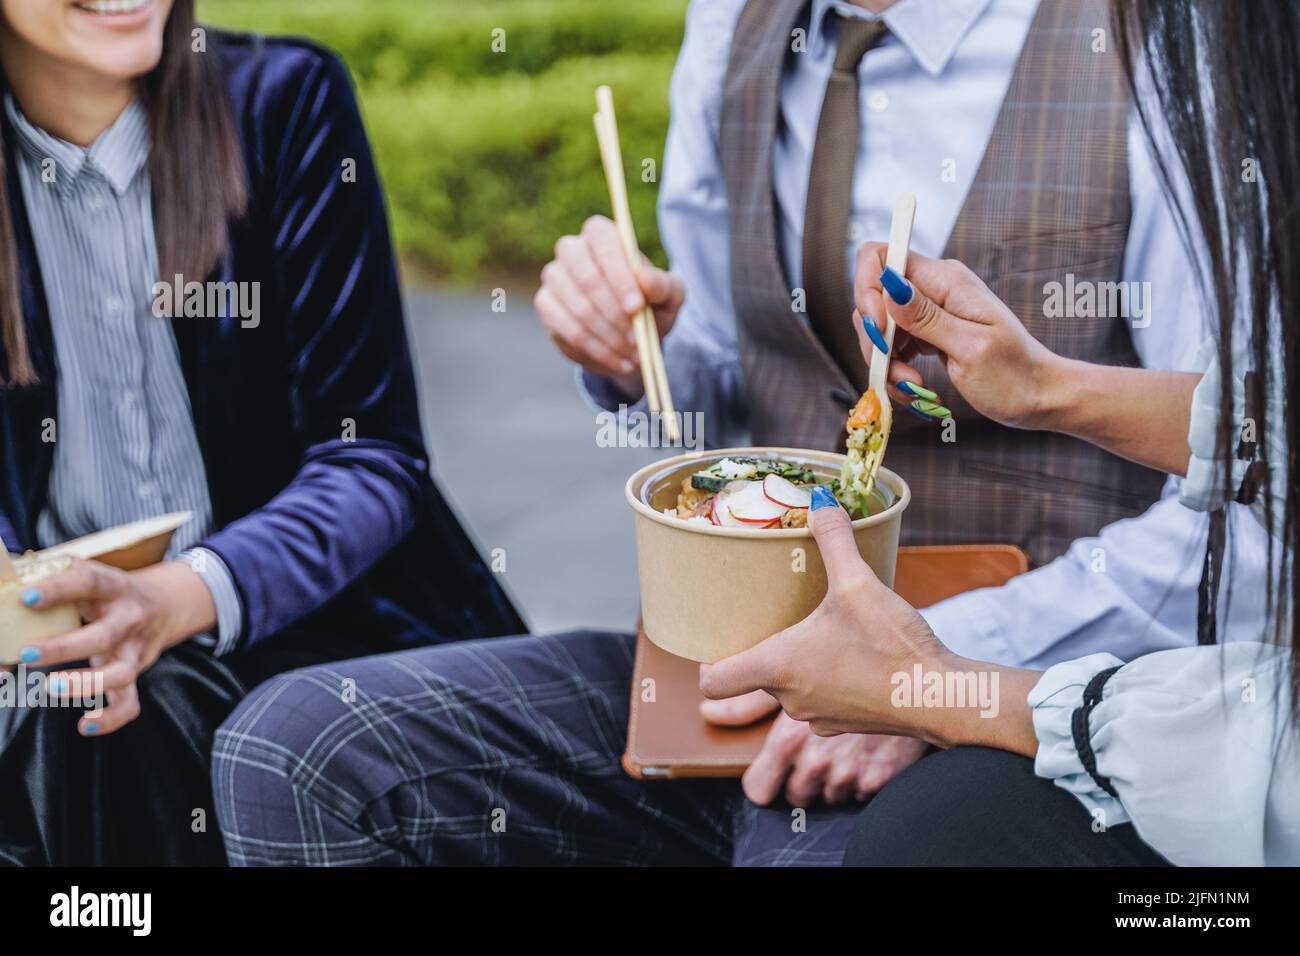 Business people eating takeaway food during lunch break outdoor outside the office - Focus on hand holding box Stock Photo